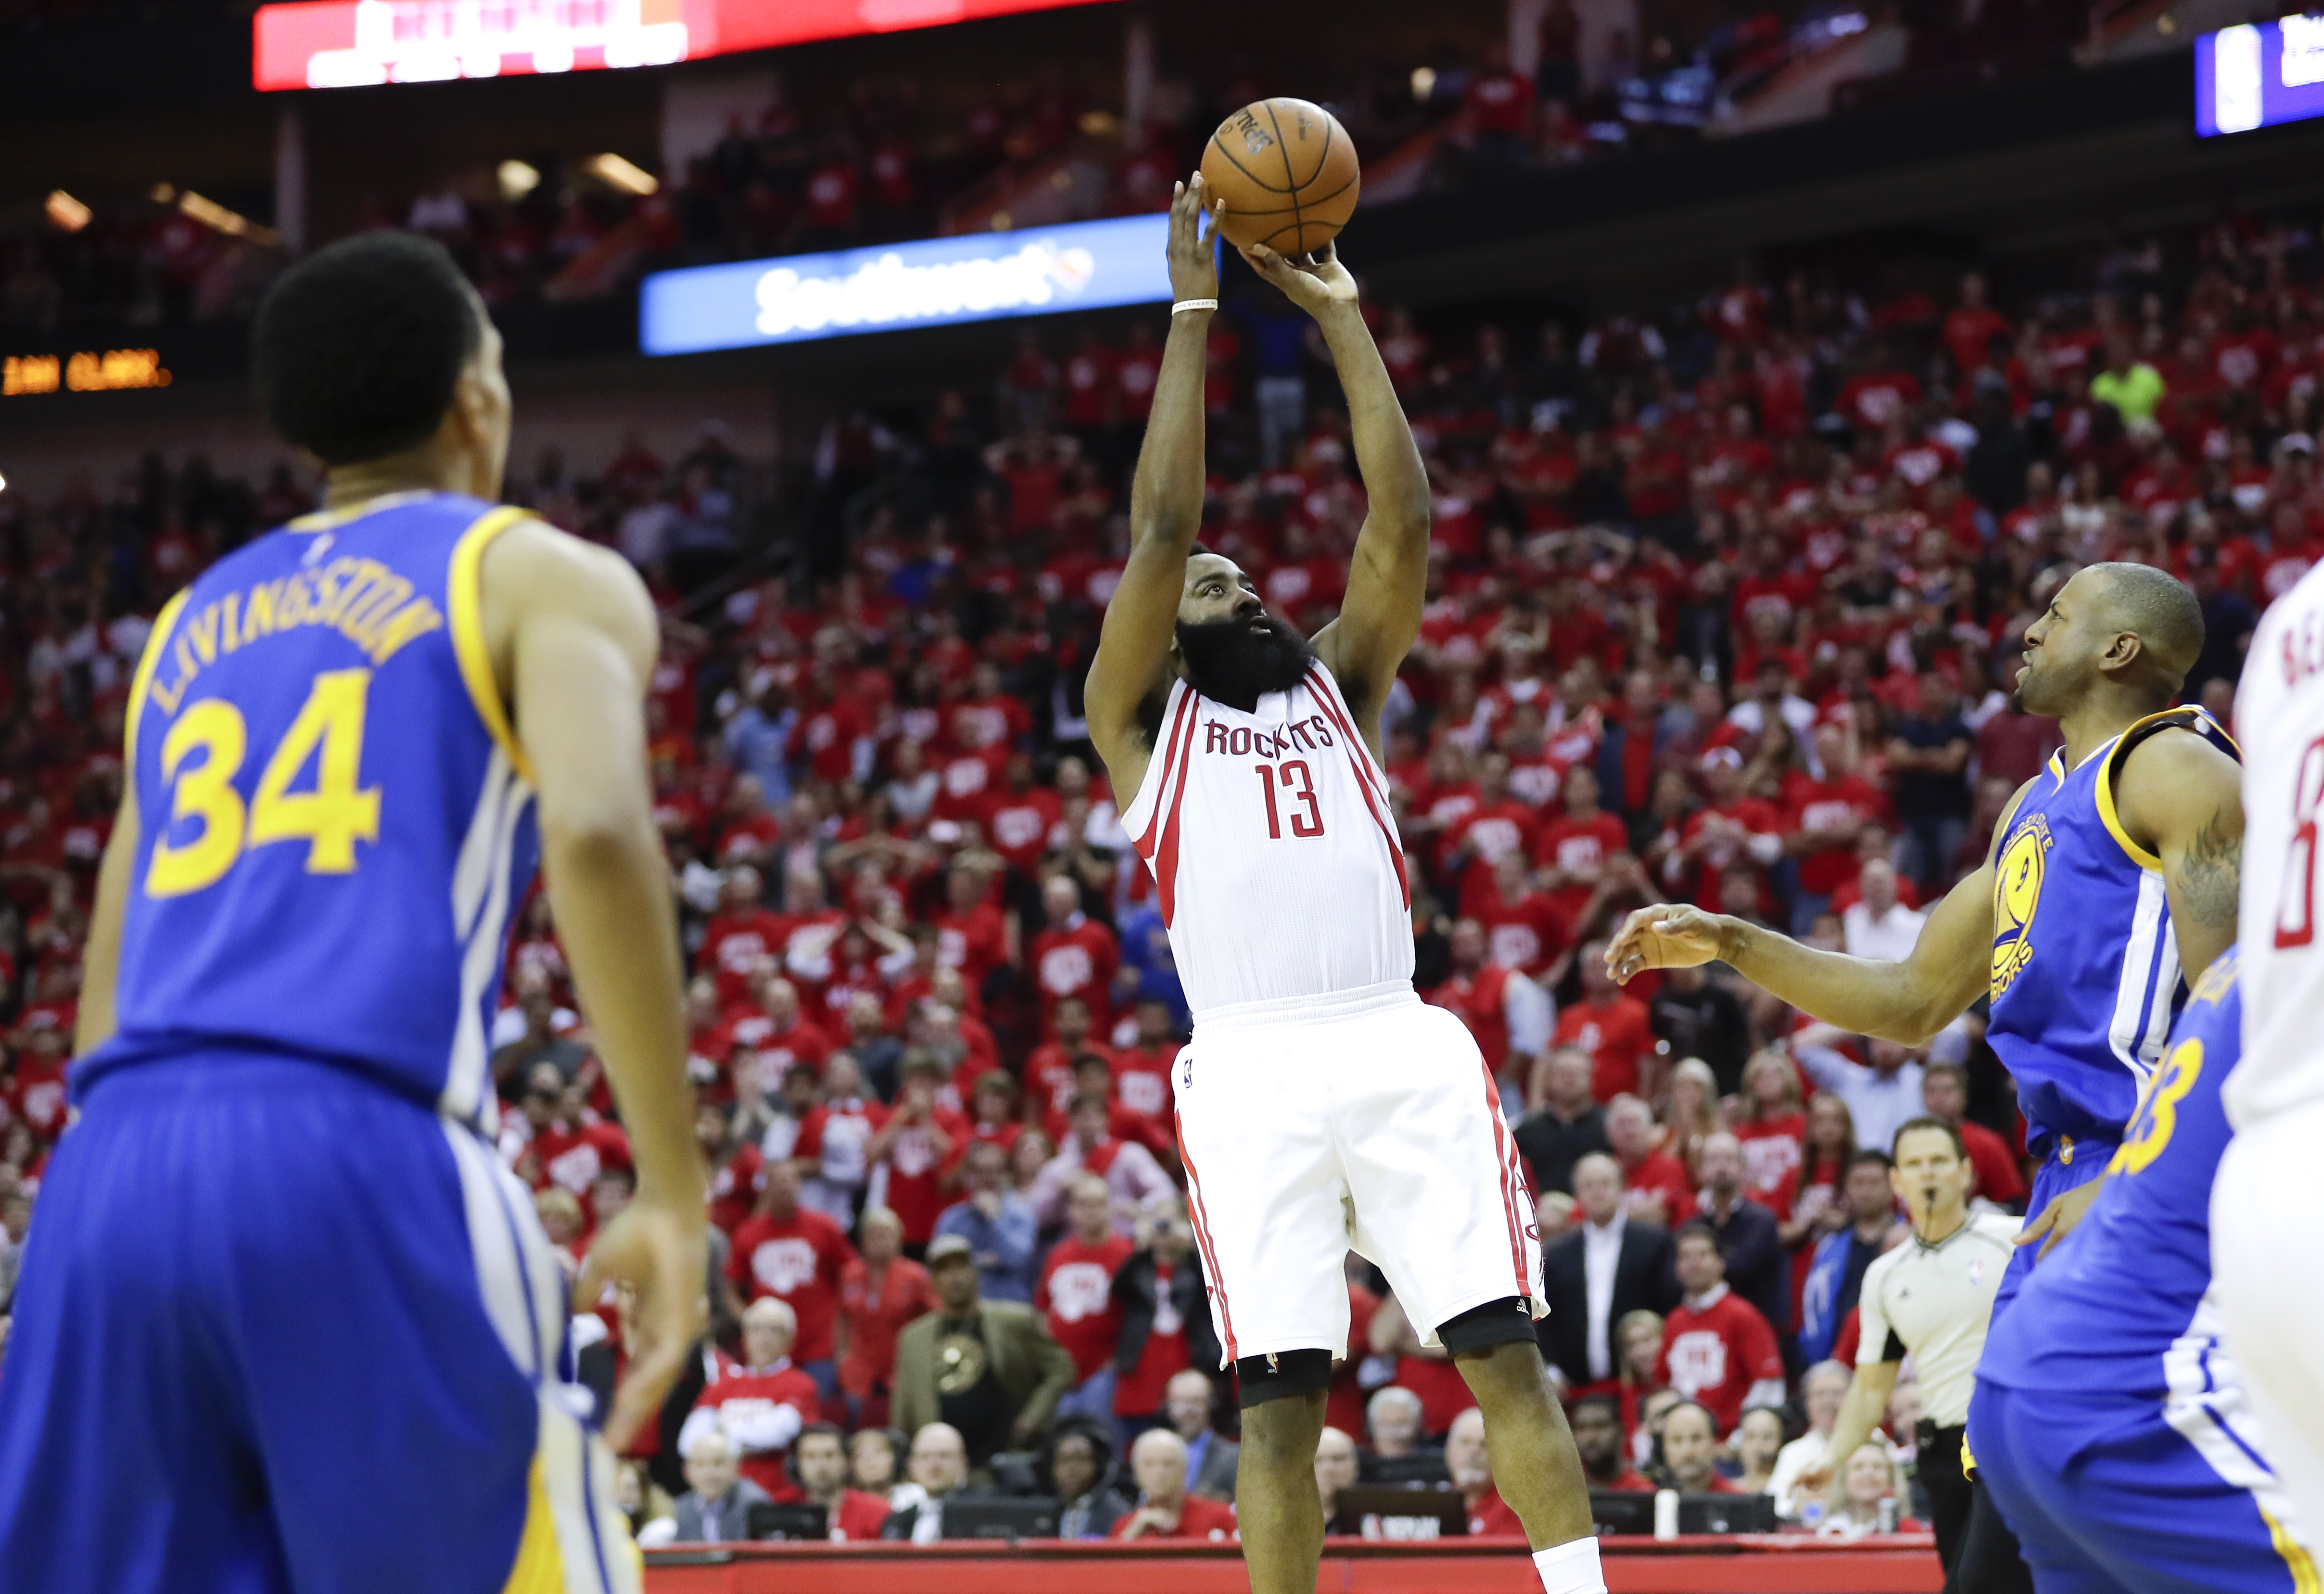 Houston Rockets guard James Harden scores the winning basket during the second half in Game 3 of a first-round NBA basketball playoff series against the Golden State Warriors, Thursday, April 21, 2016, in Houston. AP